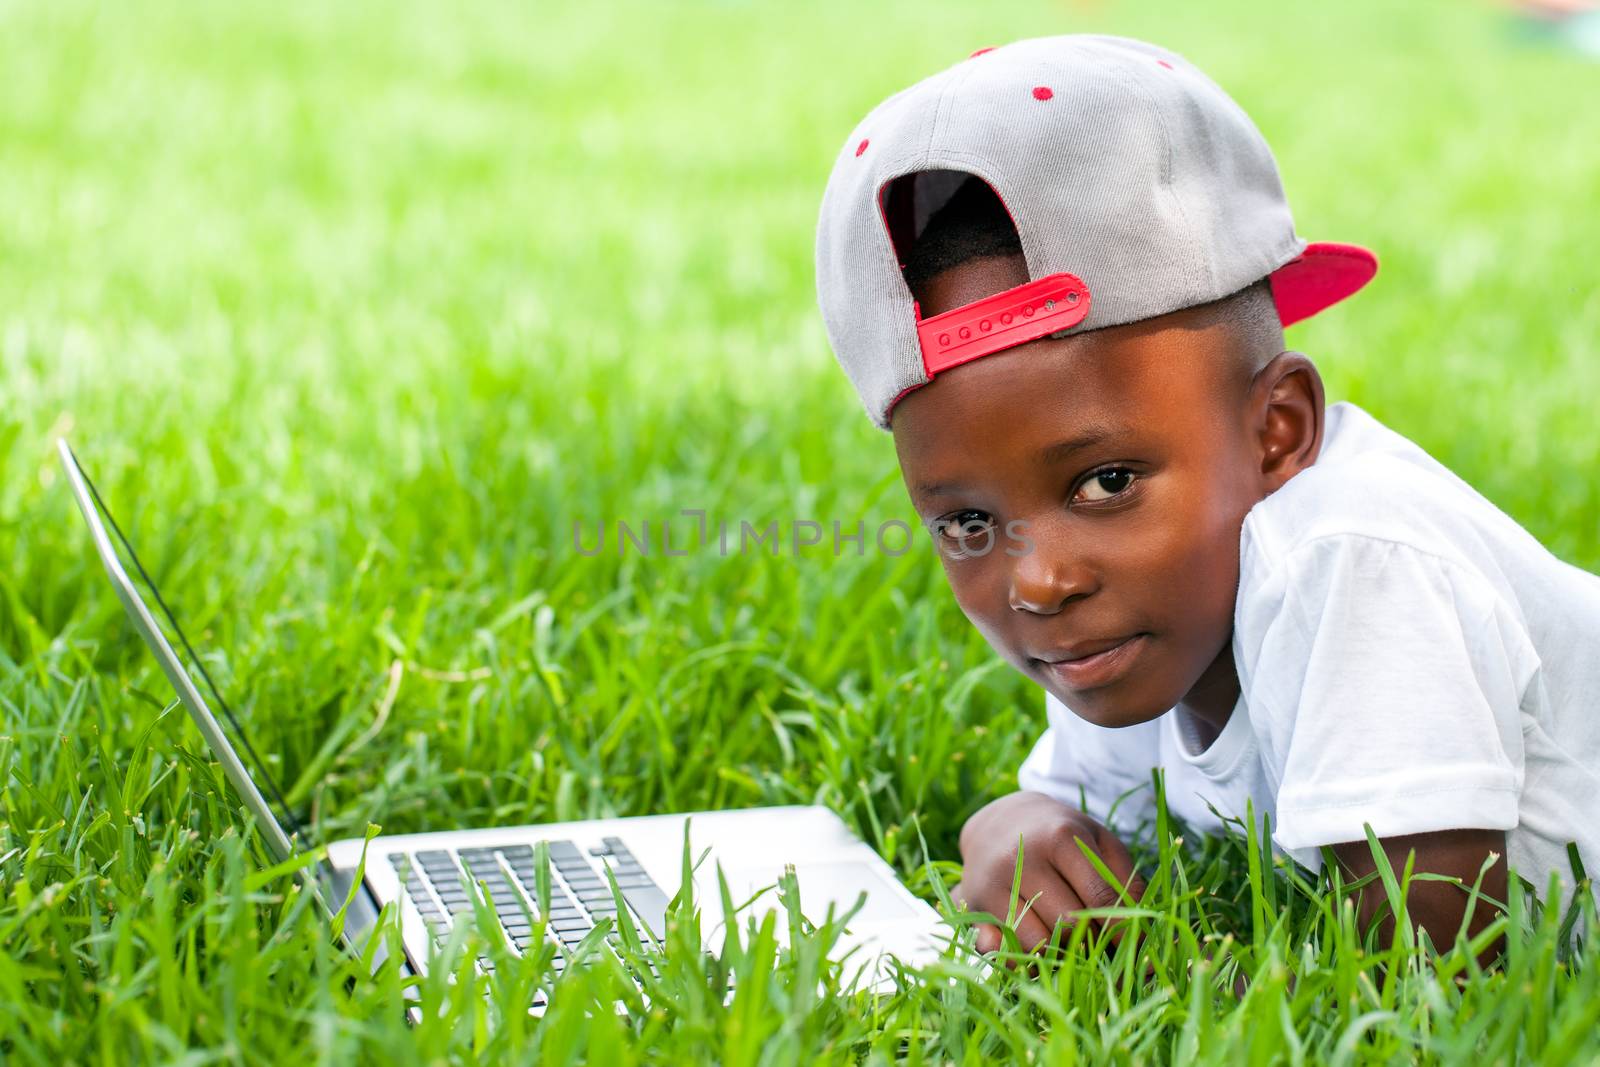 Close up portrait of African boy with baseball hat laying with laptop on grass.
